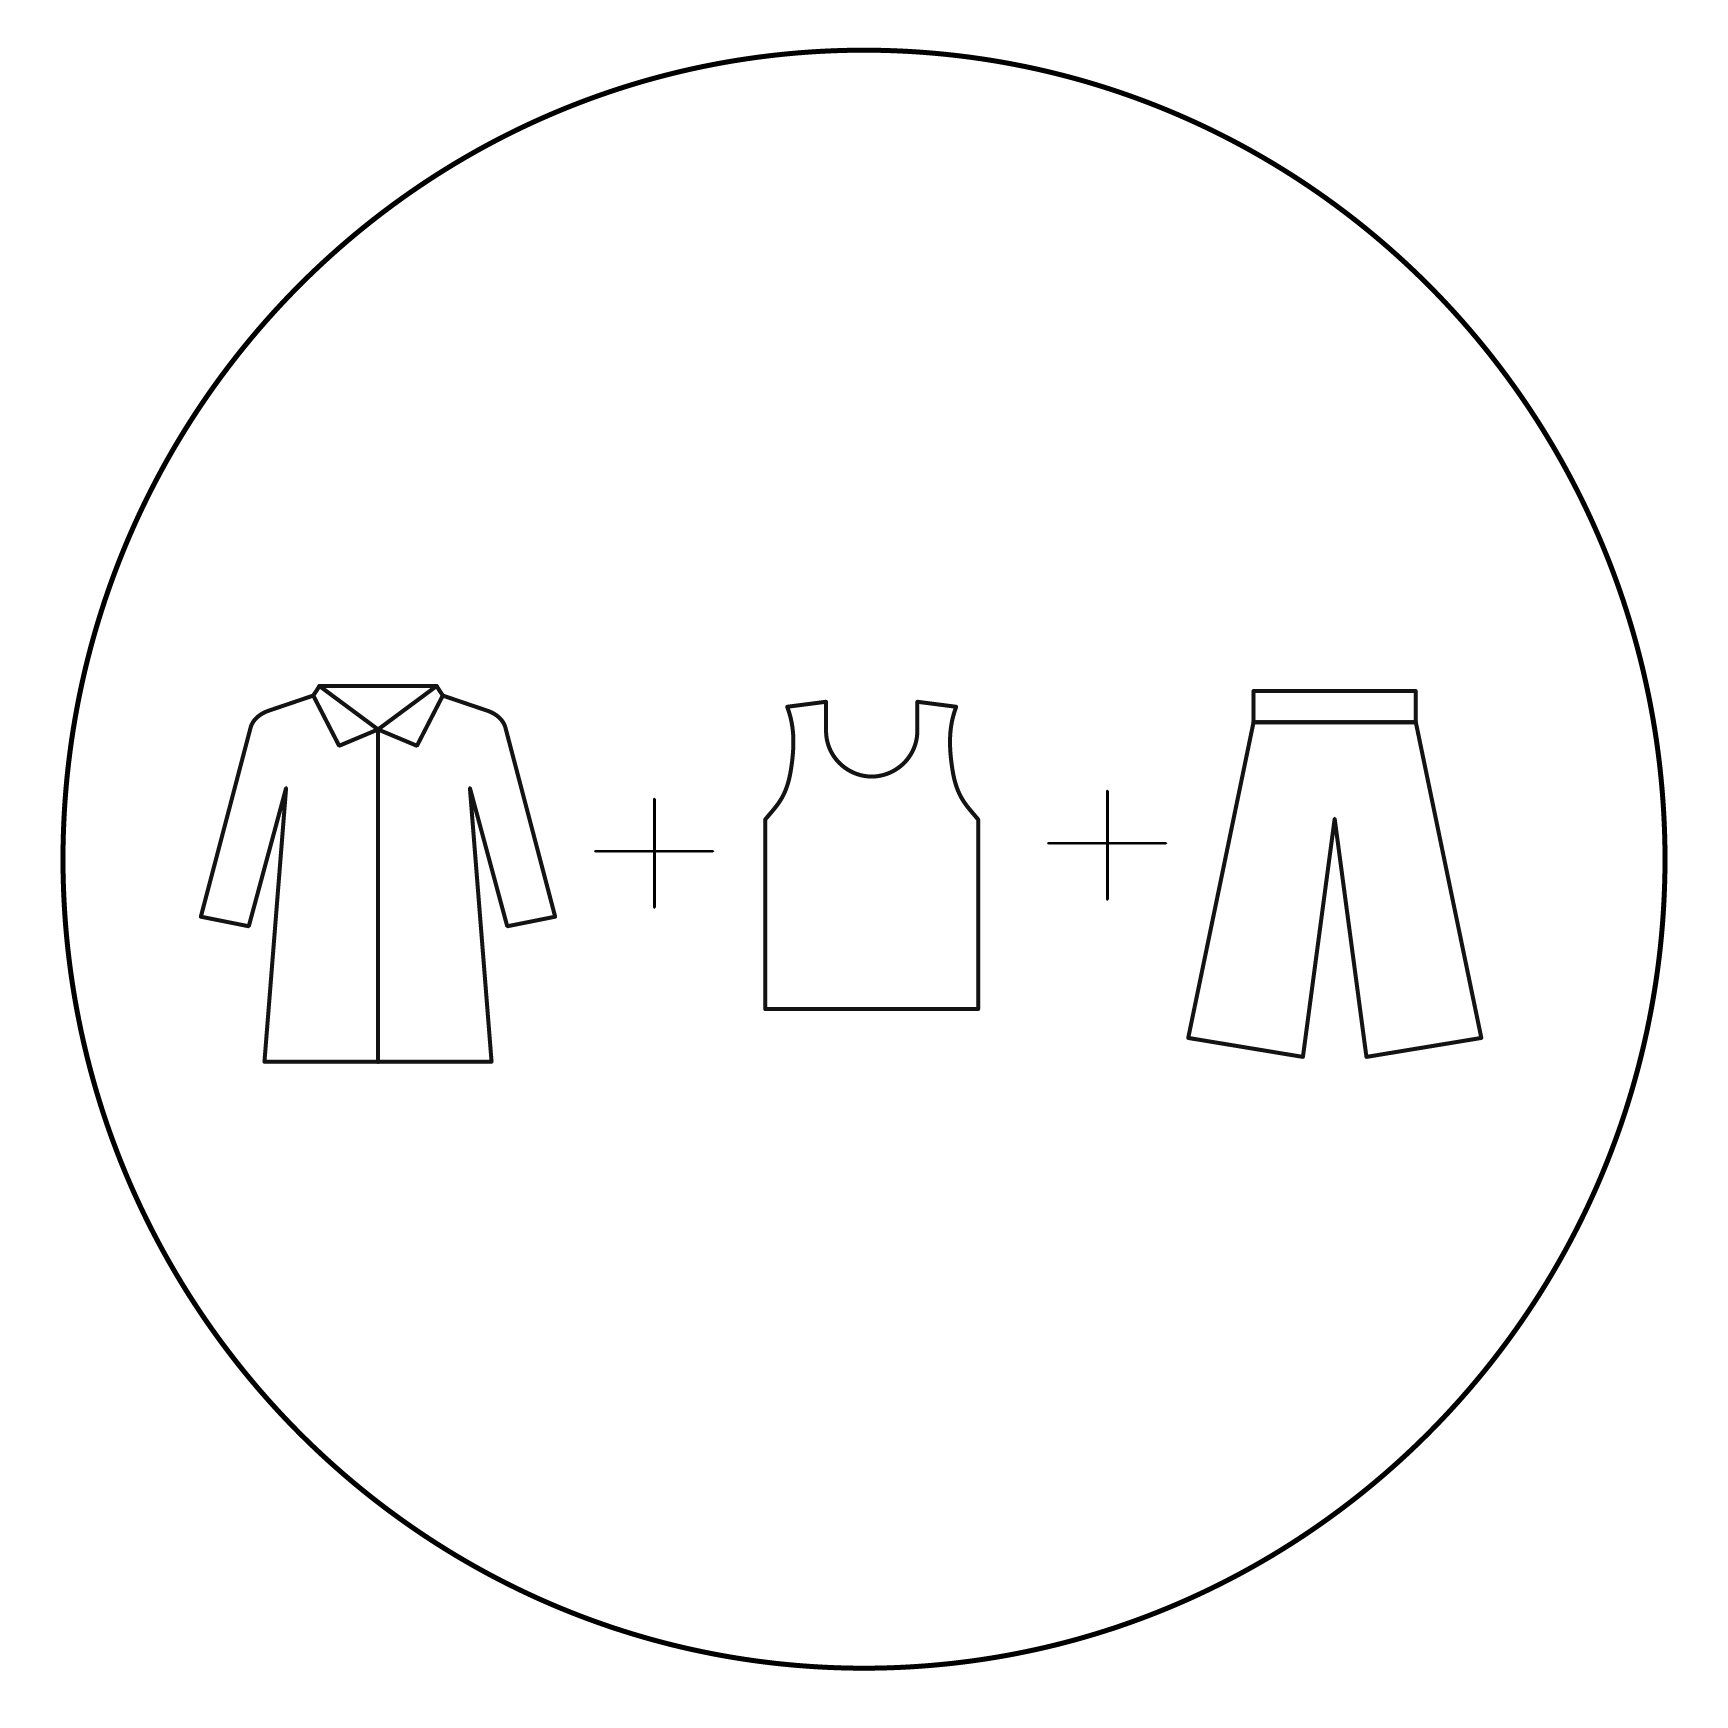 Graphic with shirt, pant and dress icons on a list with a check and x mark